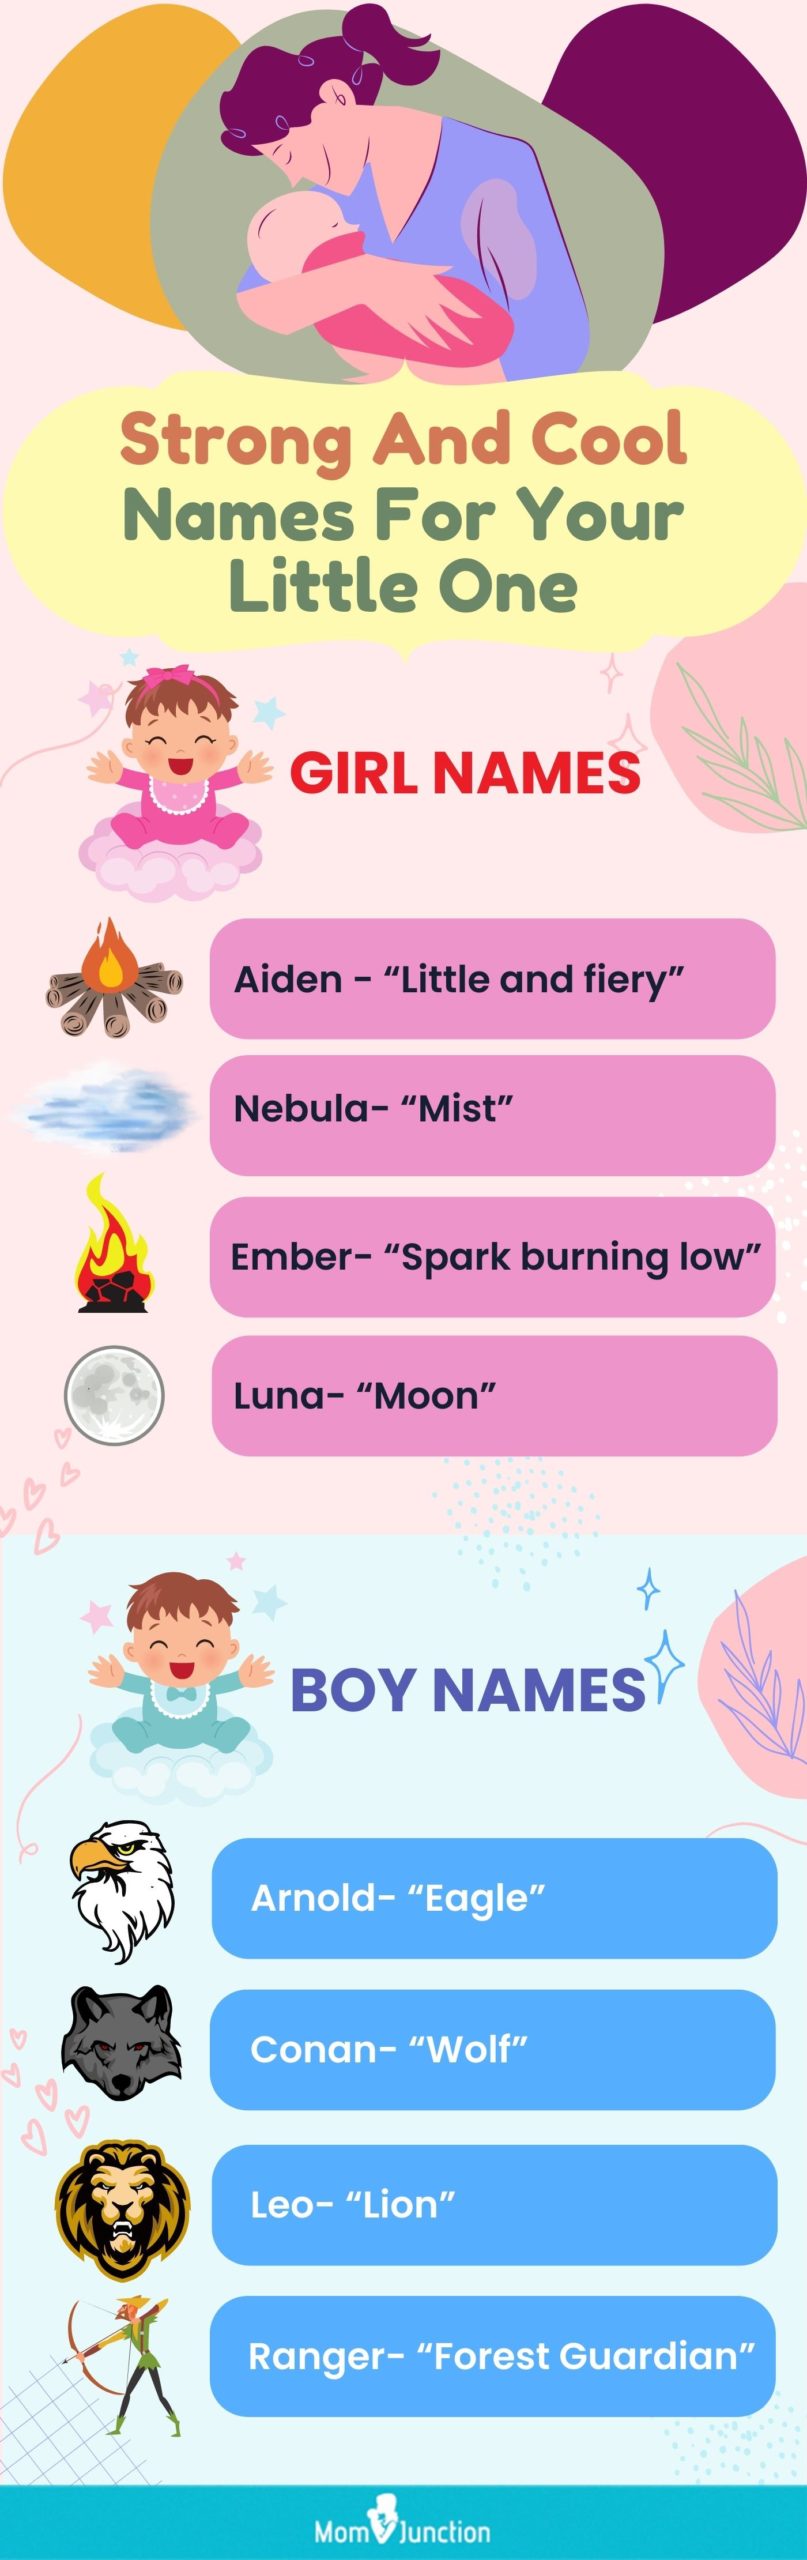 strong and cool names for your little one [infographic]